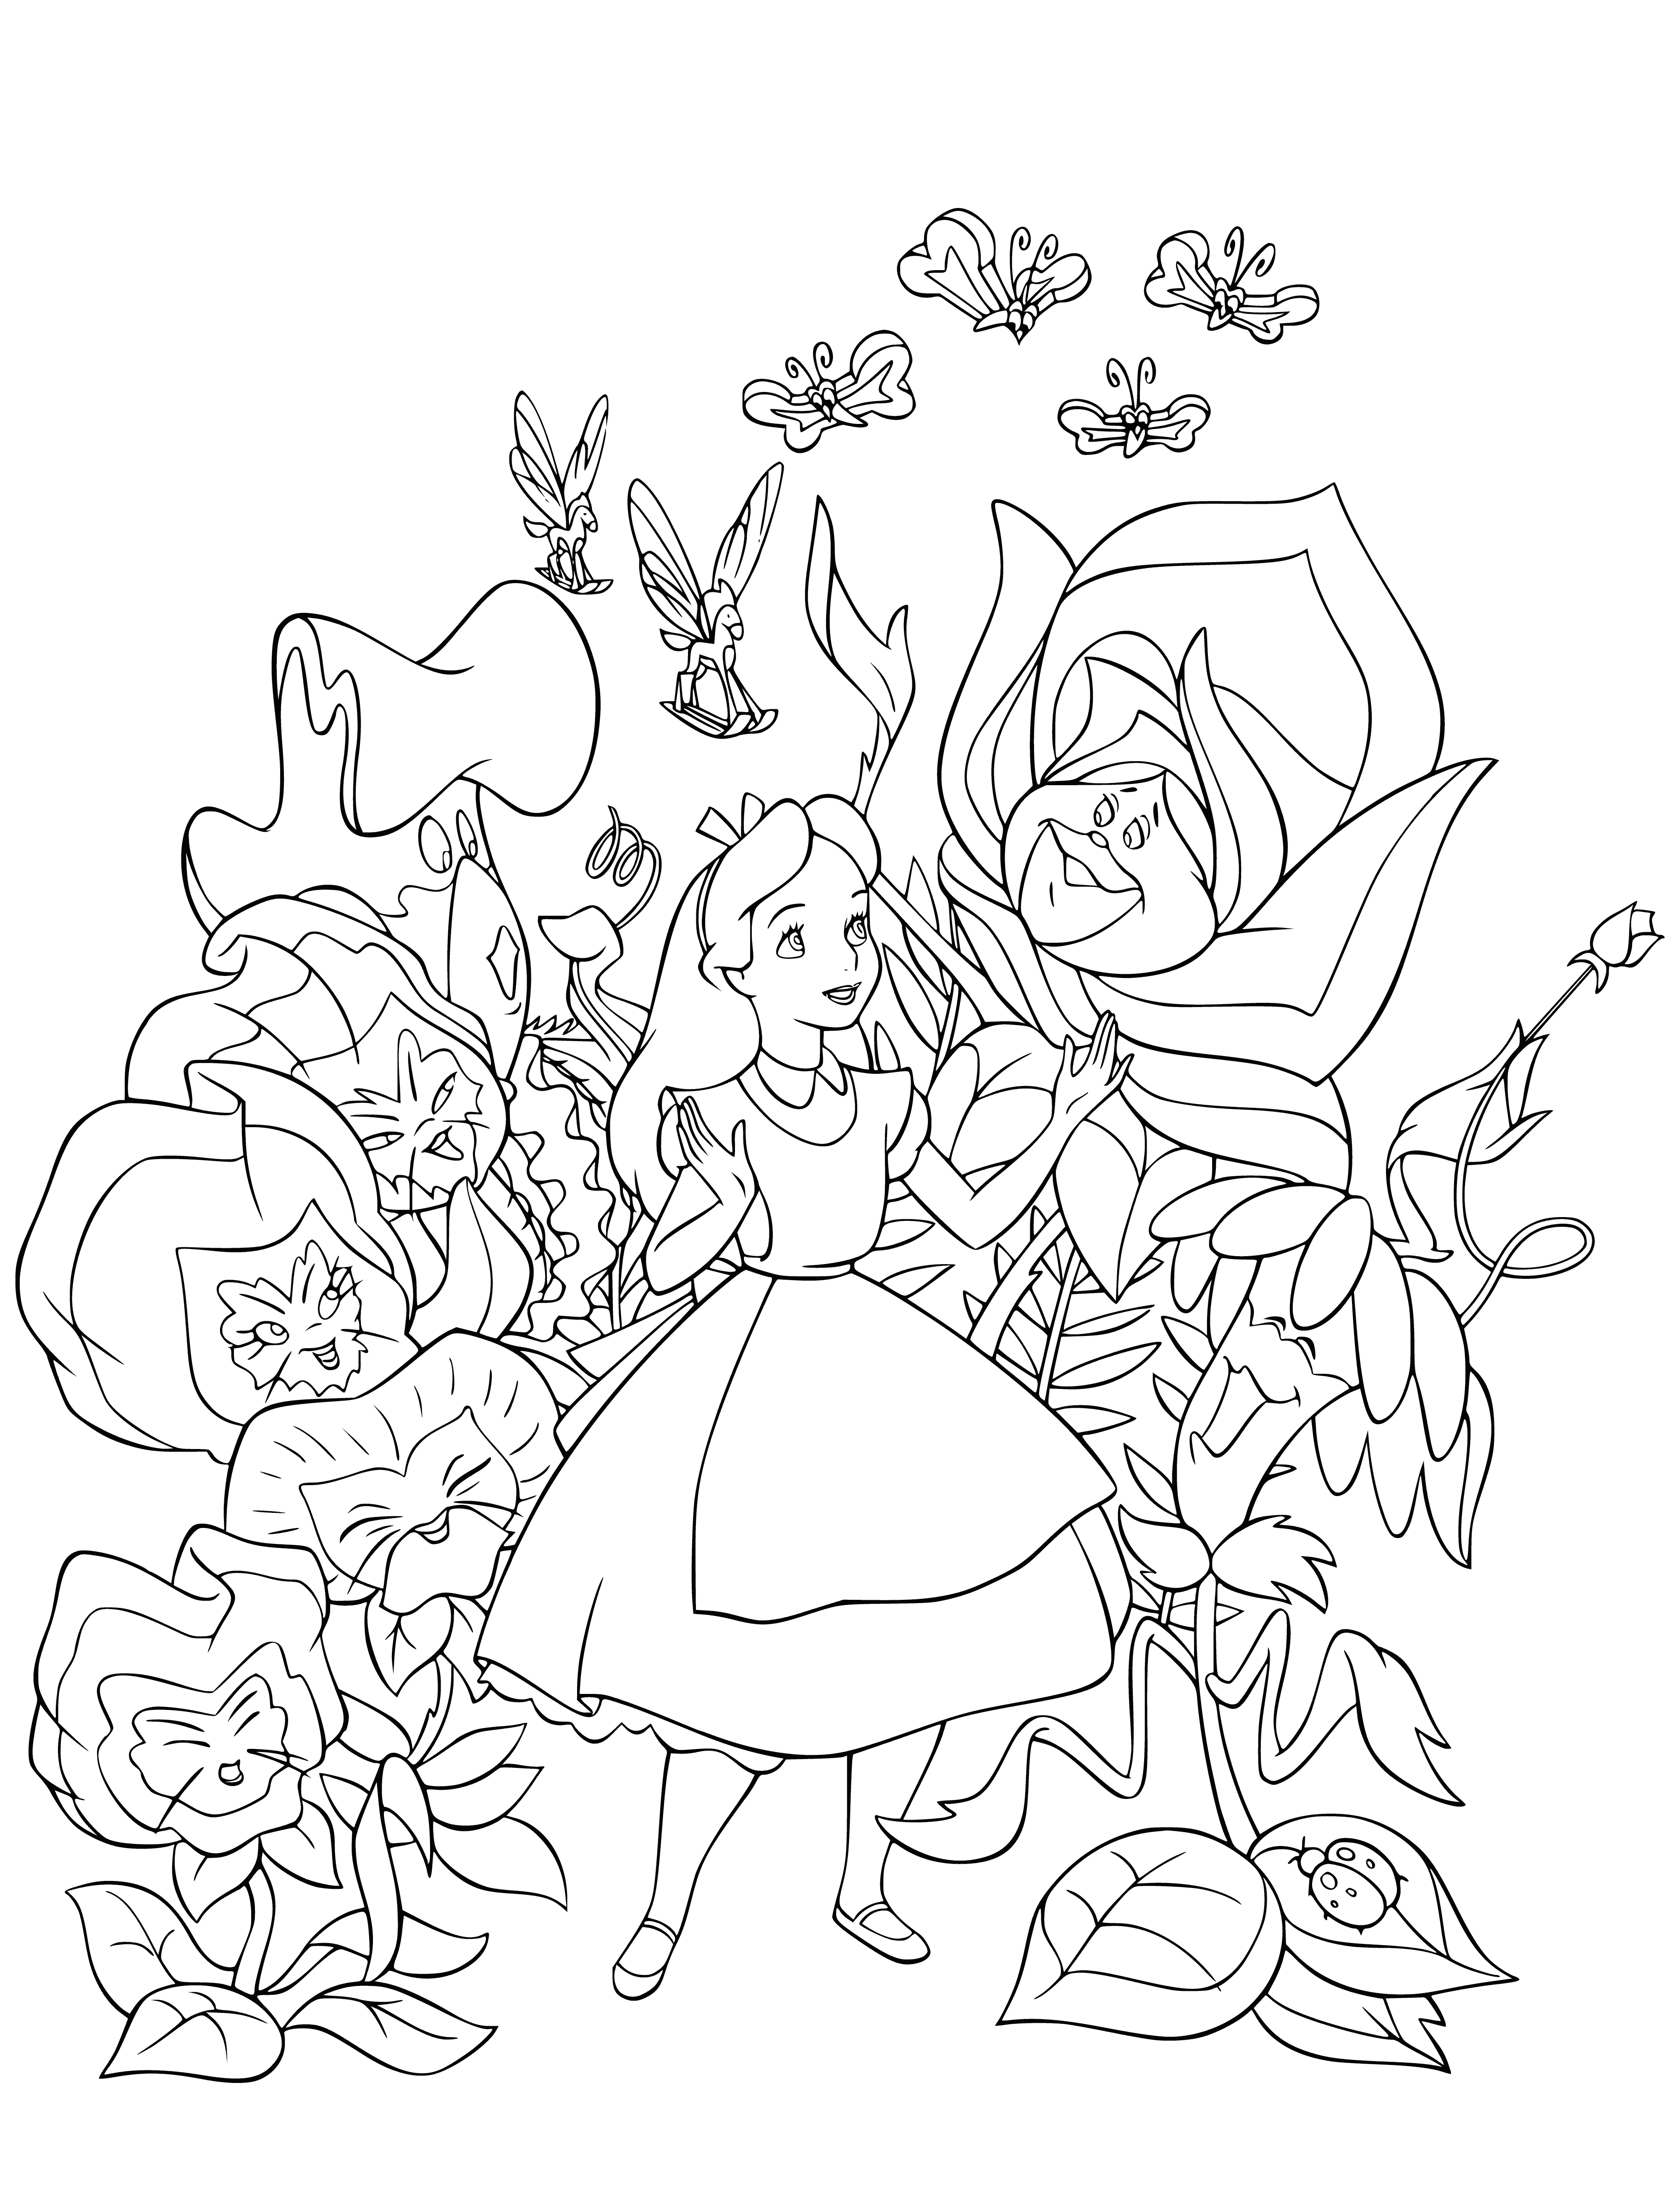 coloring page: Alice's Wonderland, flowers w/ black spots, blue/white w/ butterfly, big tree w/ yellow/black bird; magical setting.